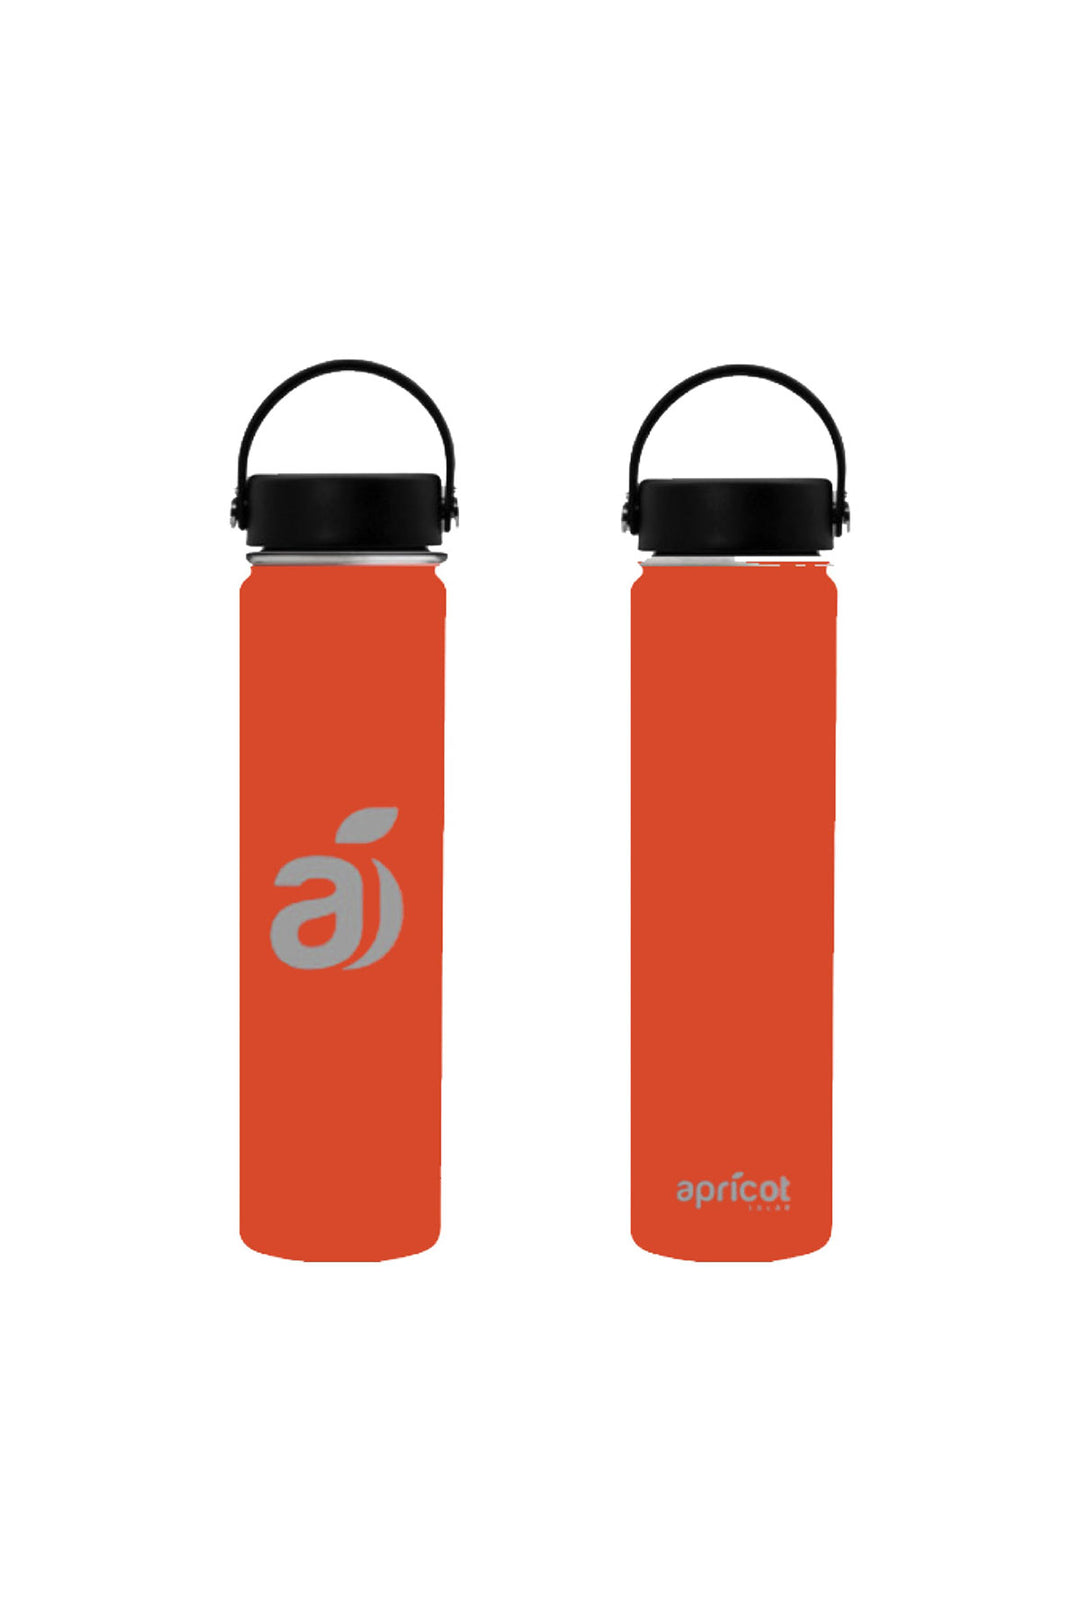 Apricot WideMouth Double Walled Water Bottle